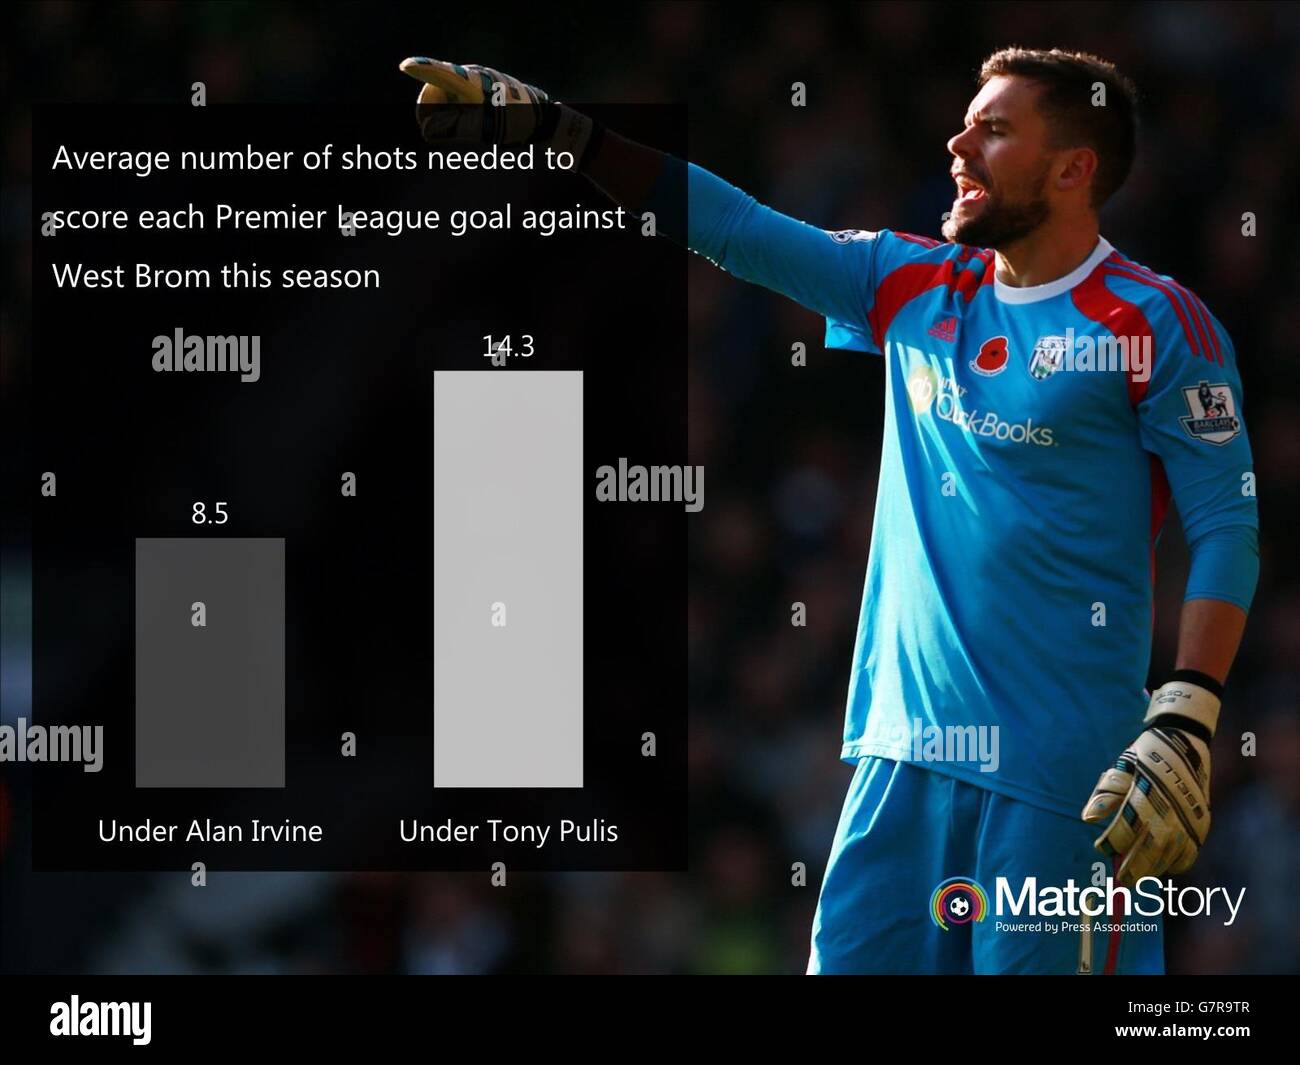 Soccer - Match Story Engine Room Graphic. A Match Story graphic showing the average number of shots needed to score each Premier League goal against West Brom this season. Stock Photo